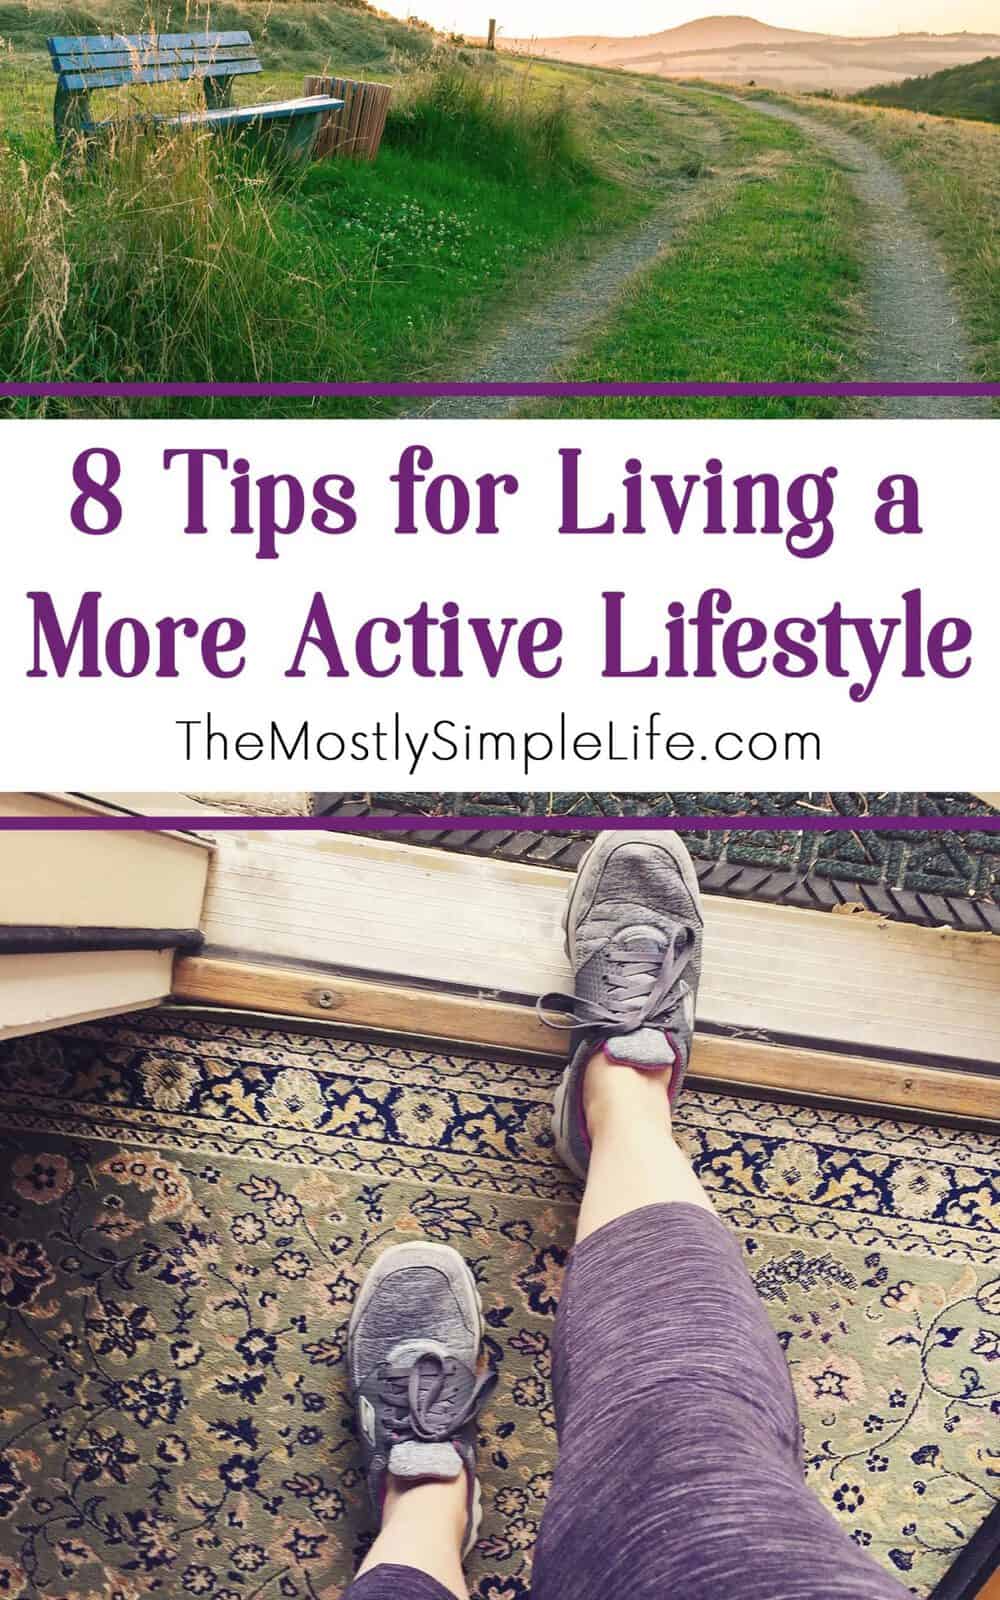 8 Tips for Living a More Active Lifestyle - The (mostly ...